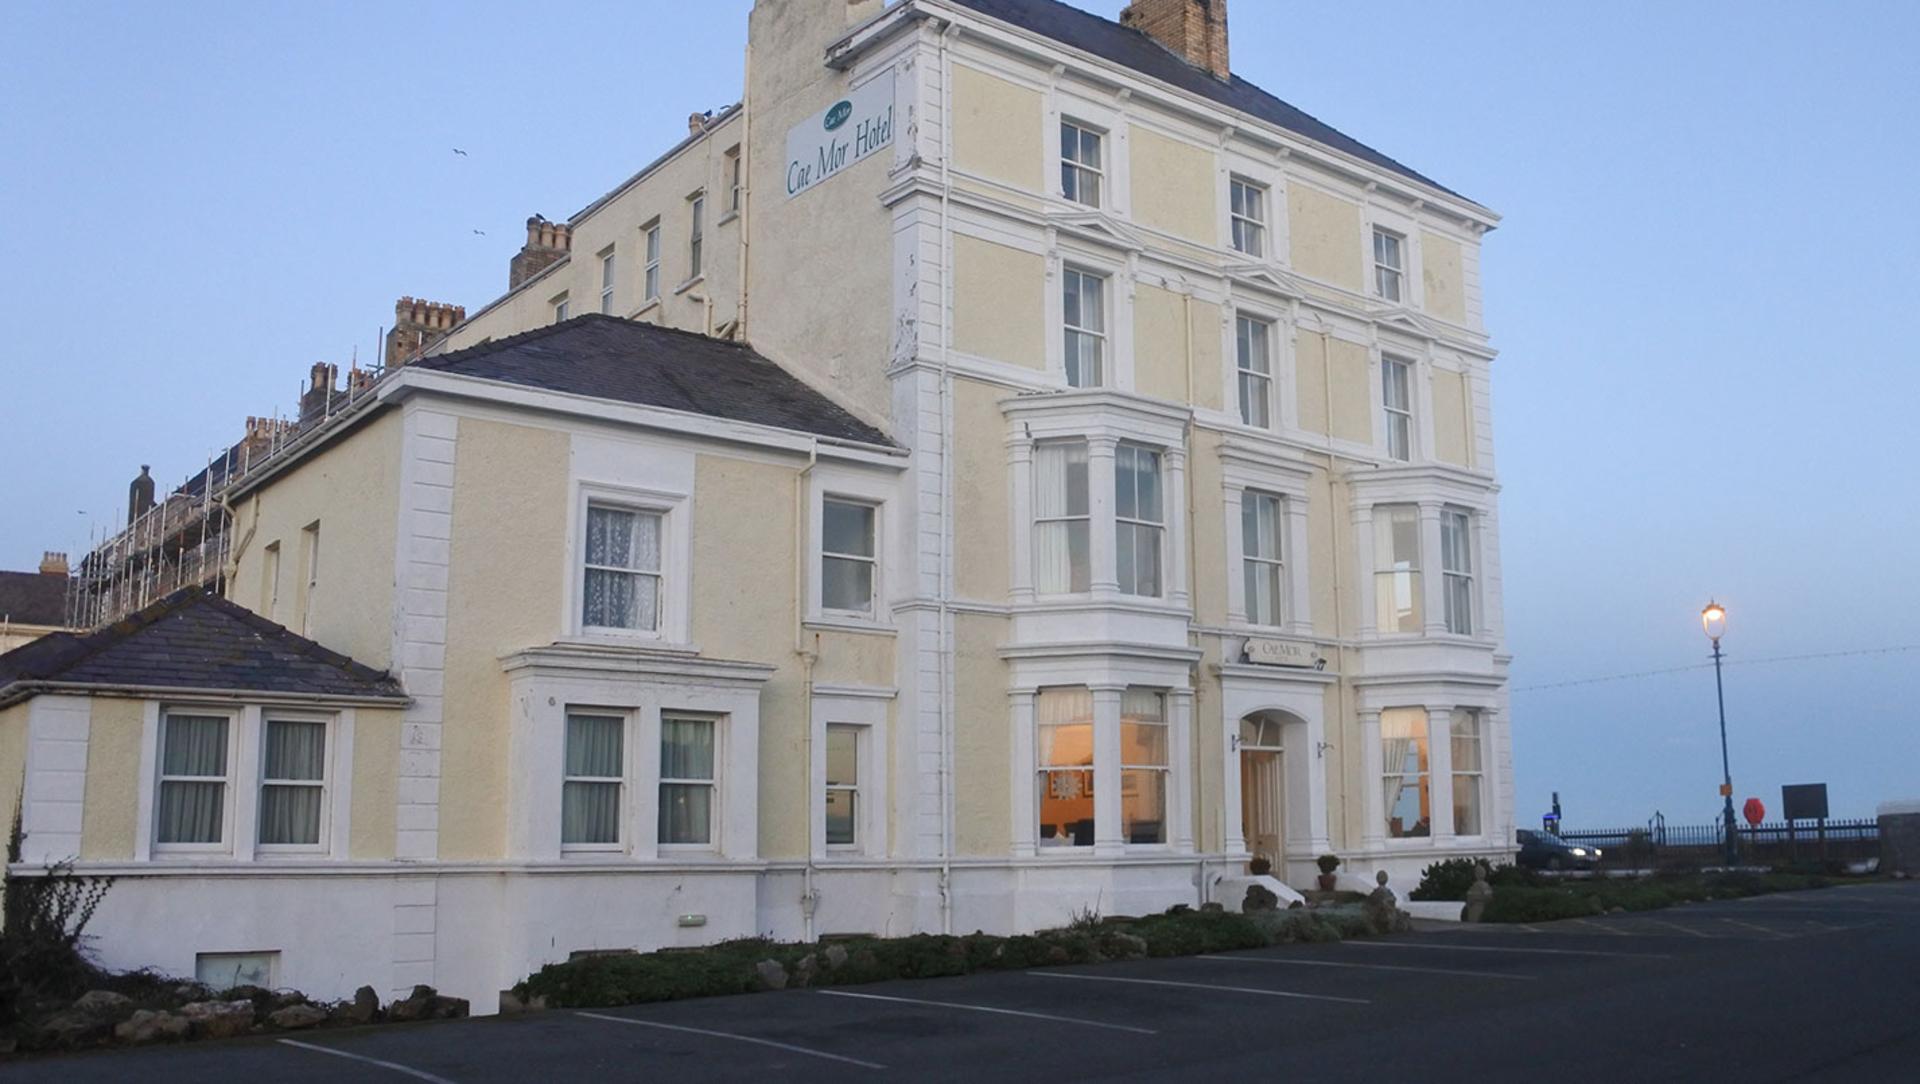 Llandudno seafront hotel brought to market for &pound;1.25m